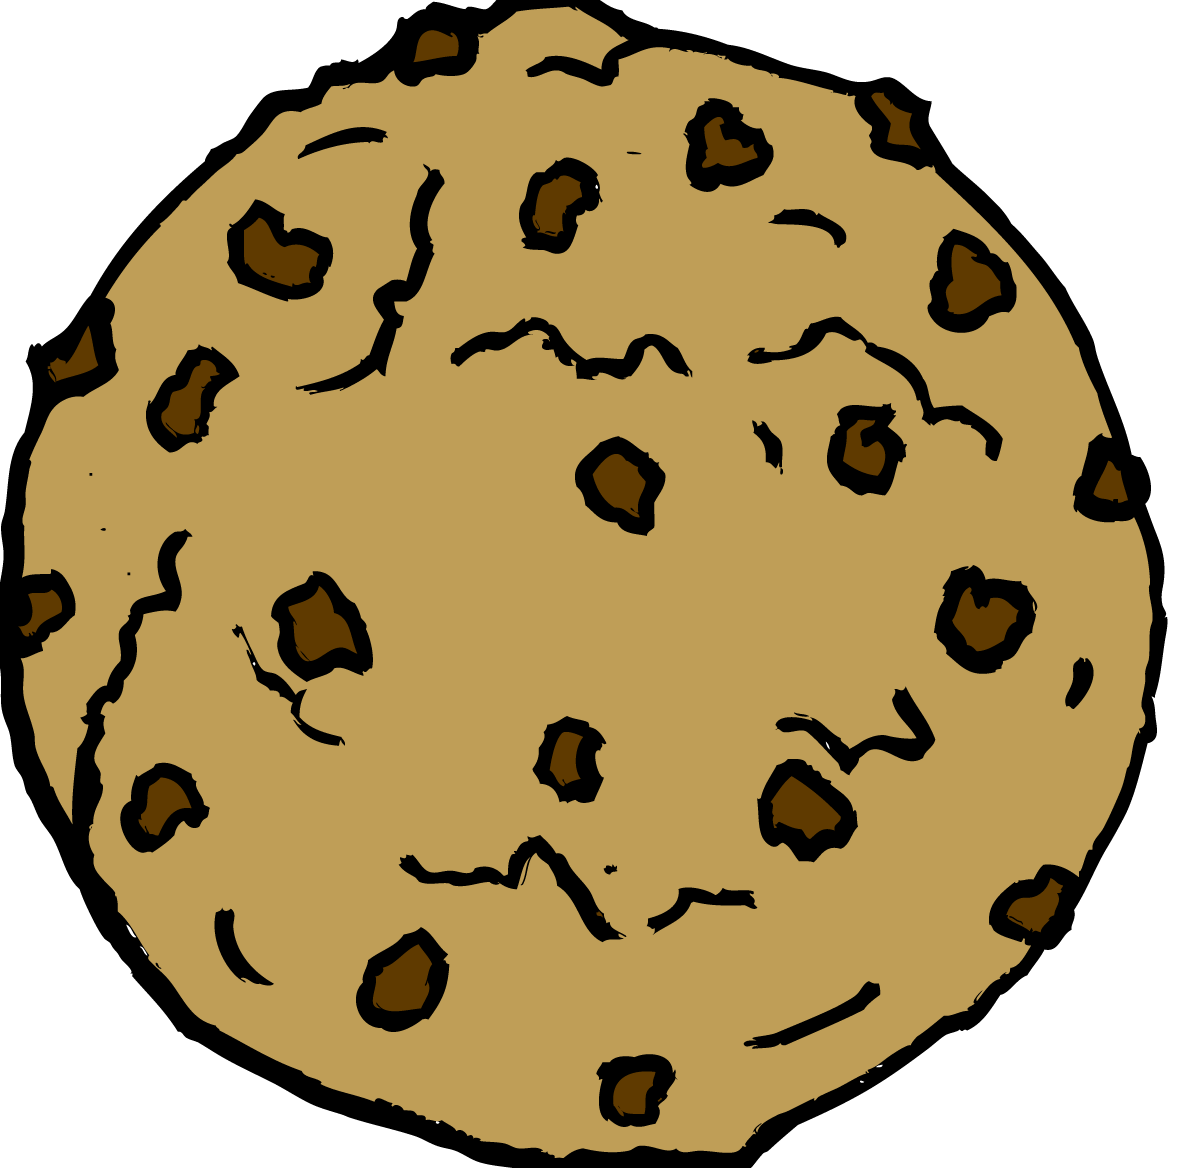 There Is 20 Chocolate Chip Cookie   Free Cliparts All Used For Free